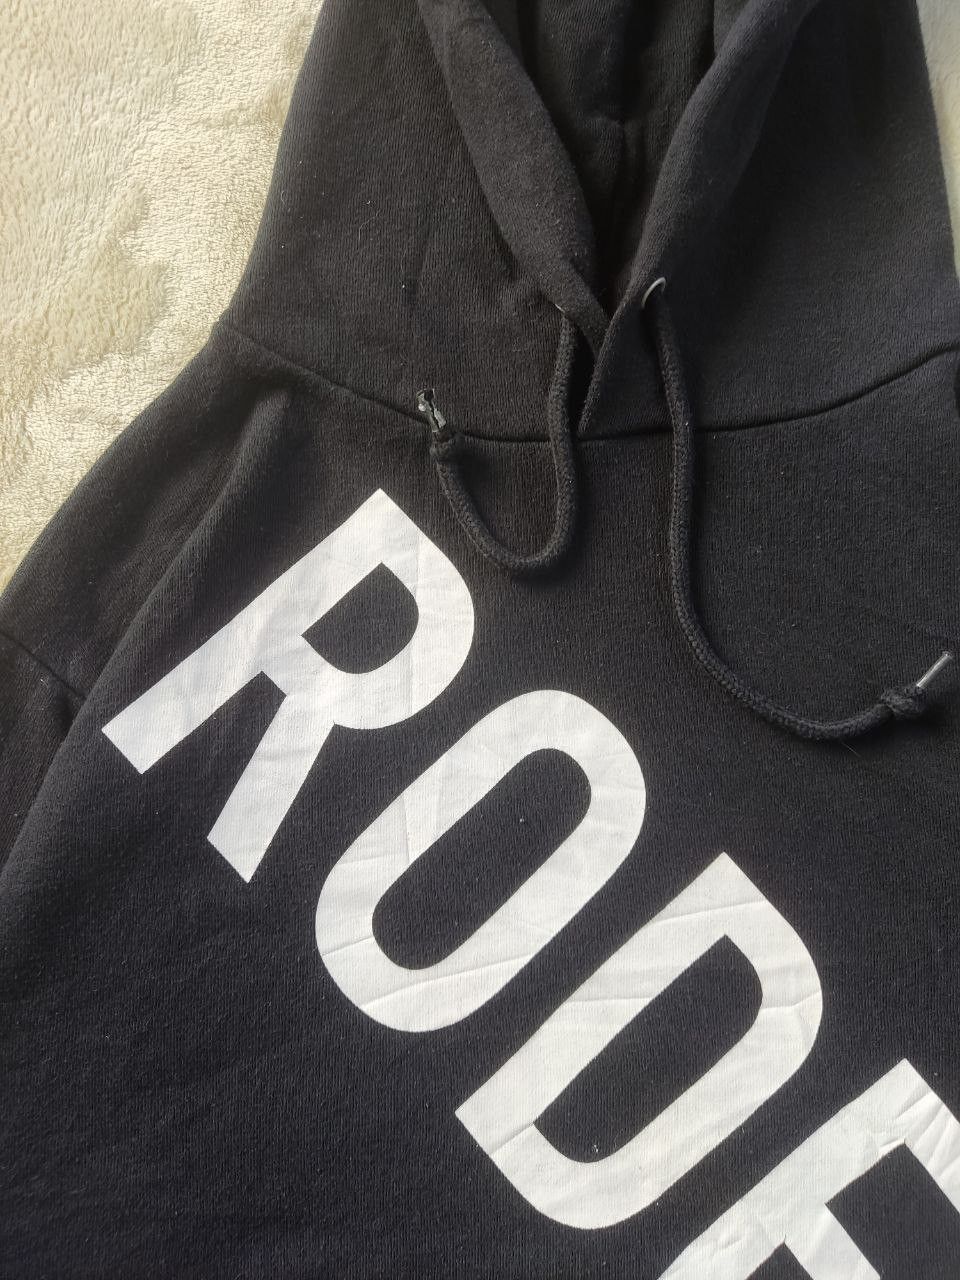 Japanese Brand - RODEO CROWN Spellout Big Graphic Baggy Pullover Hoodie - 8